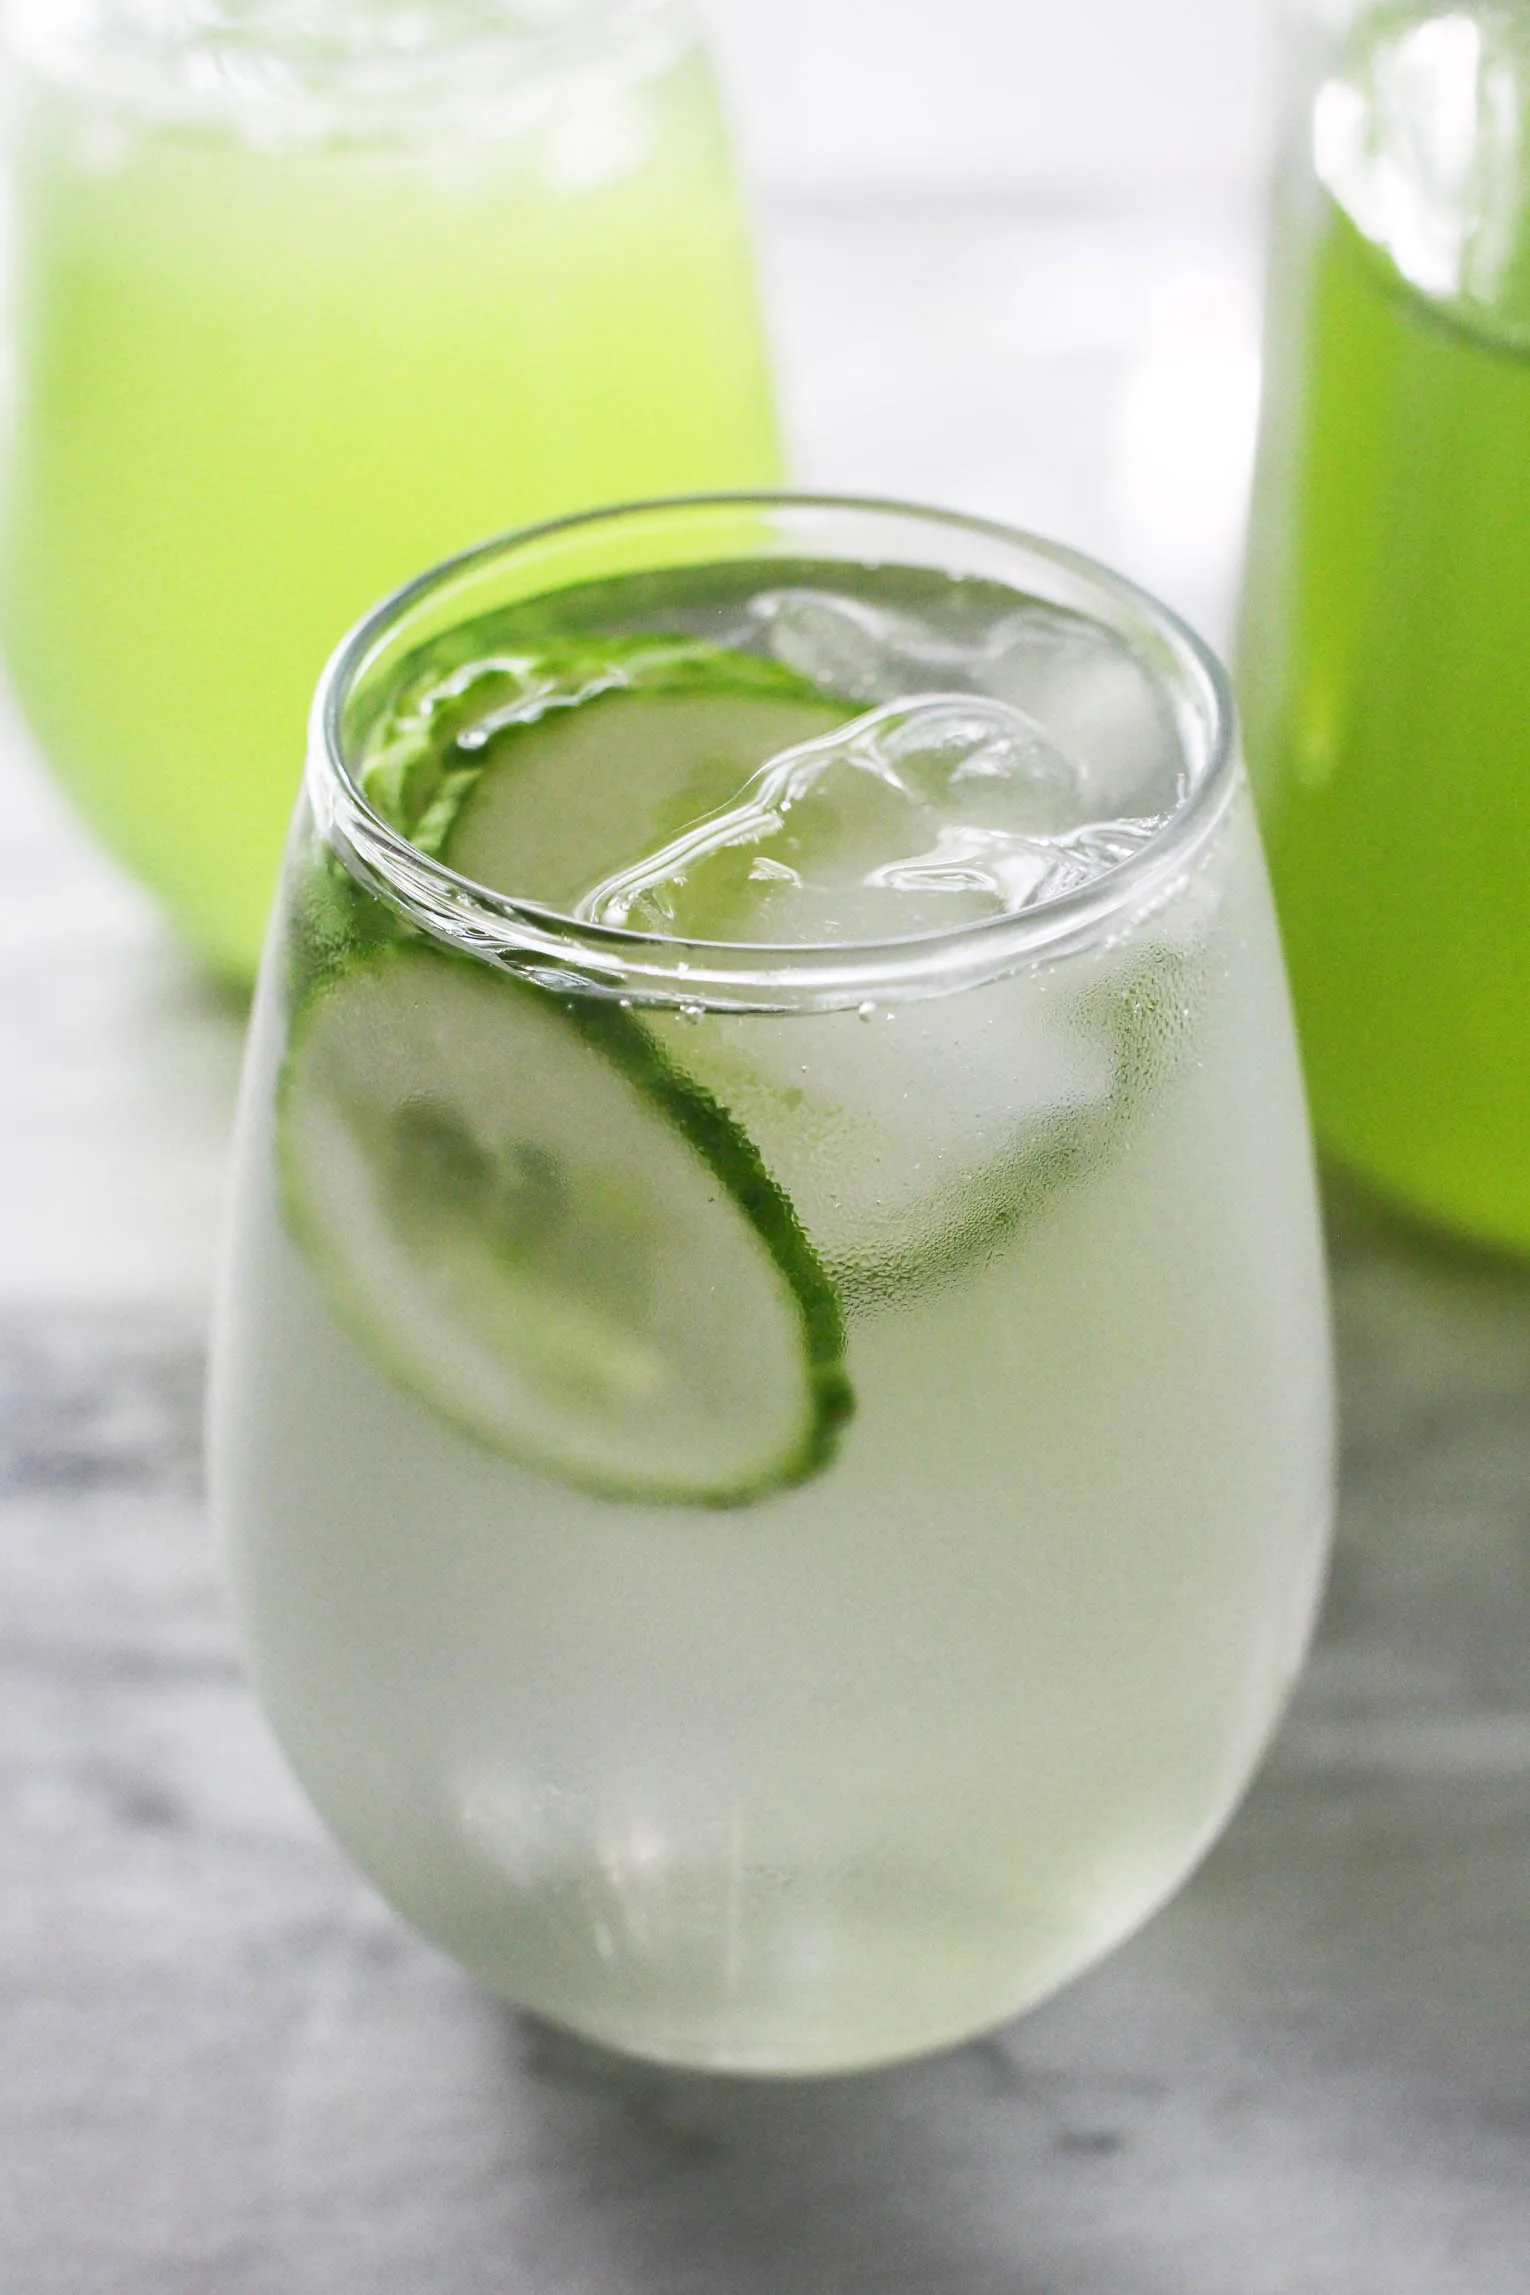 A glass with water, cucumber slices, and ice. Another glass with green liquid in the bakcground.